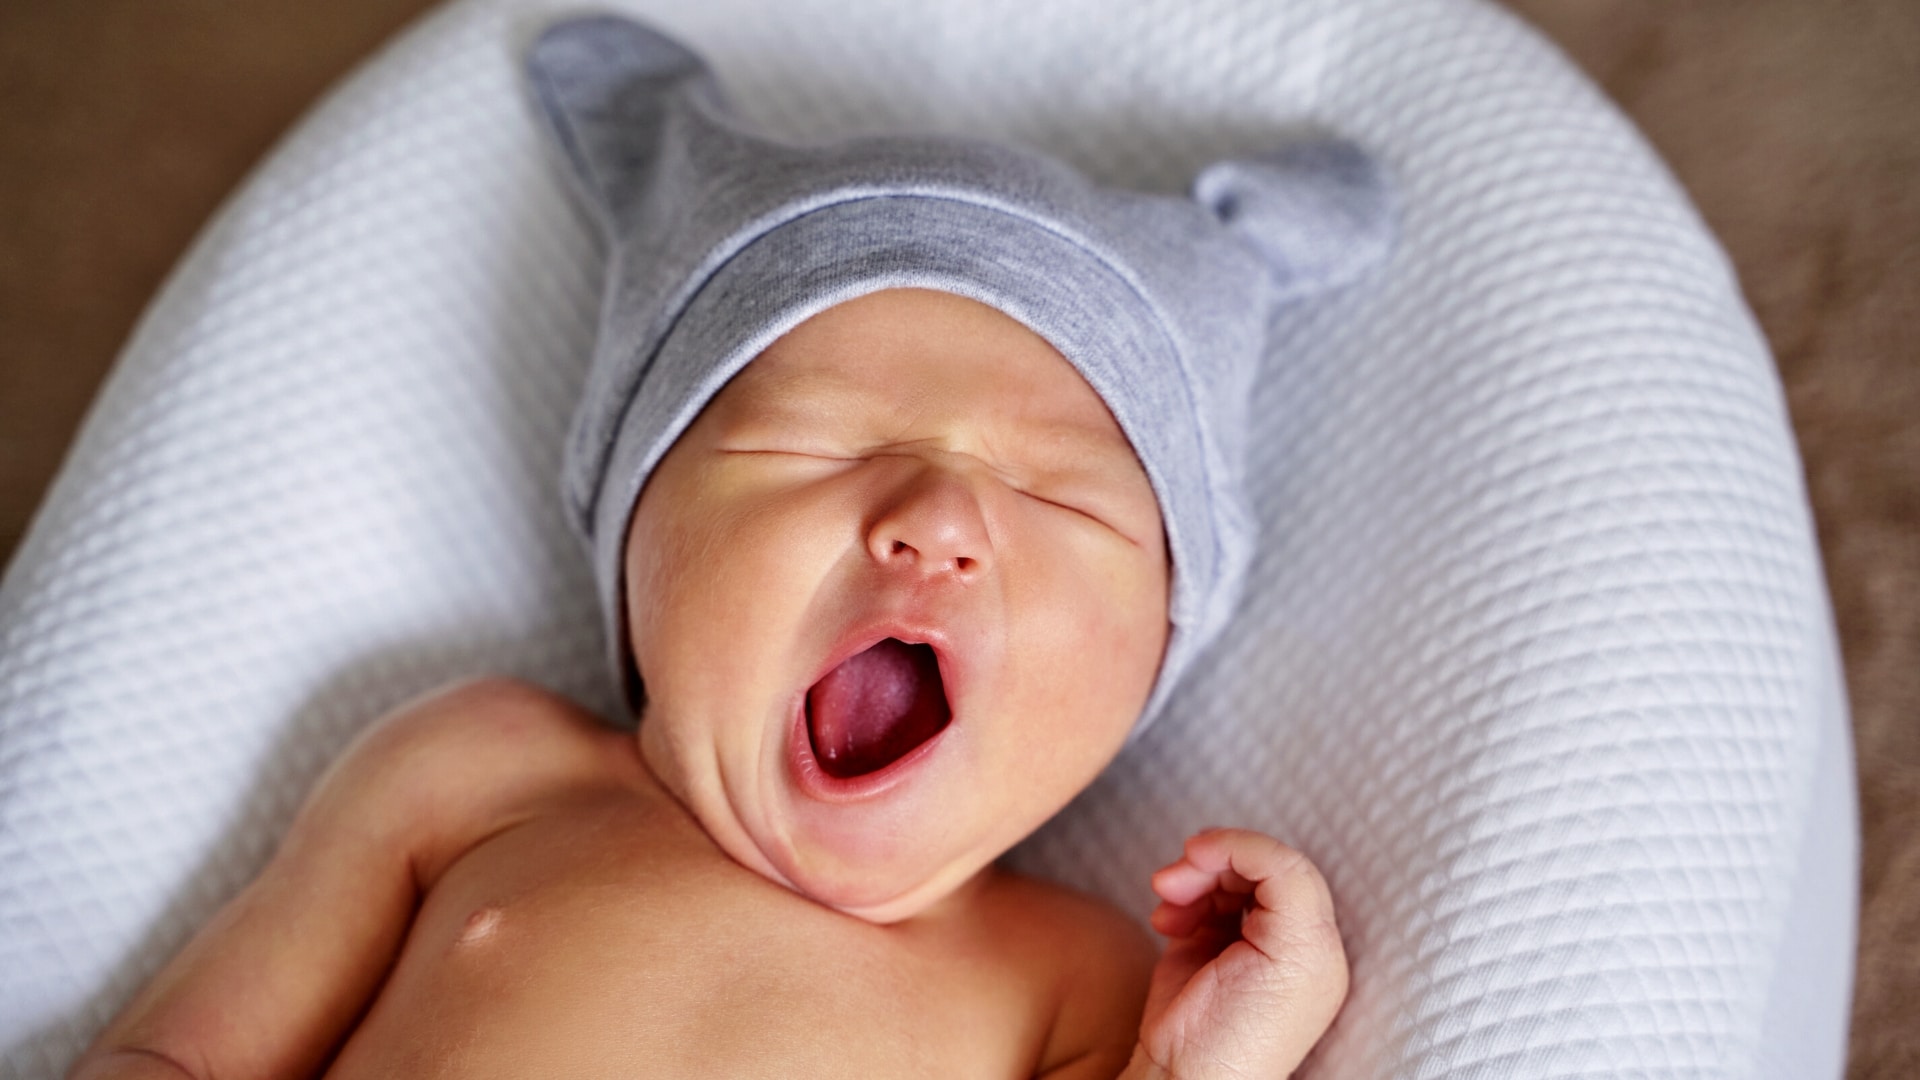 6 Signs You Have An Overtired Baby: Solutions & Prevention!